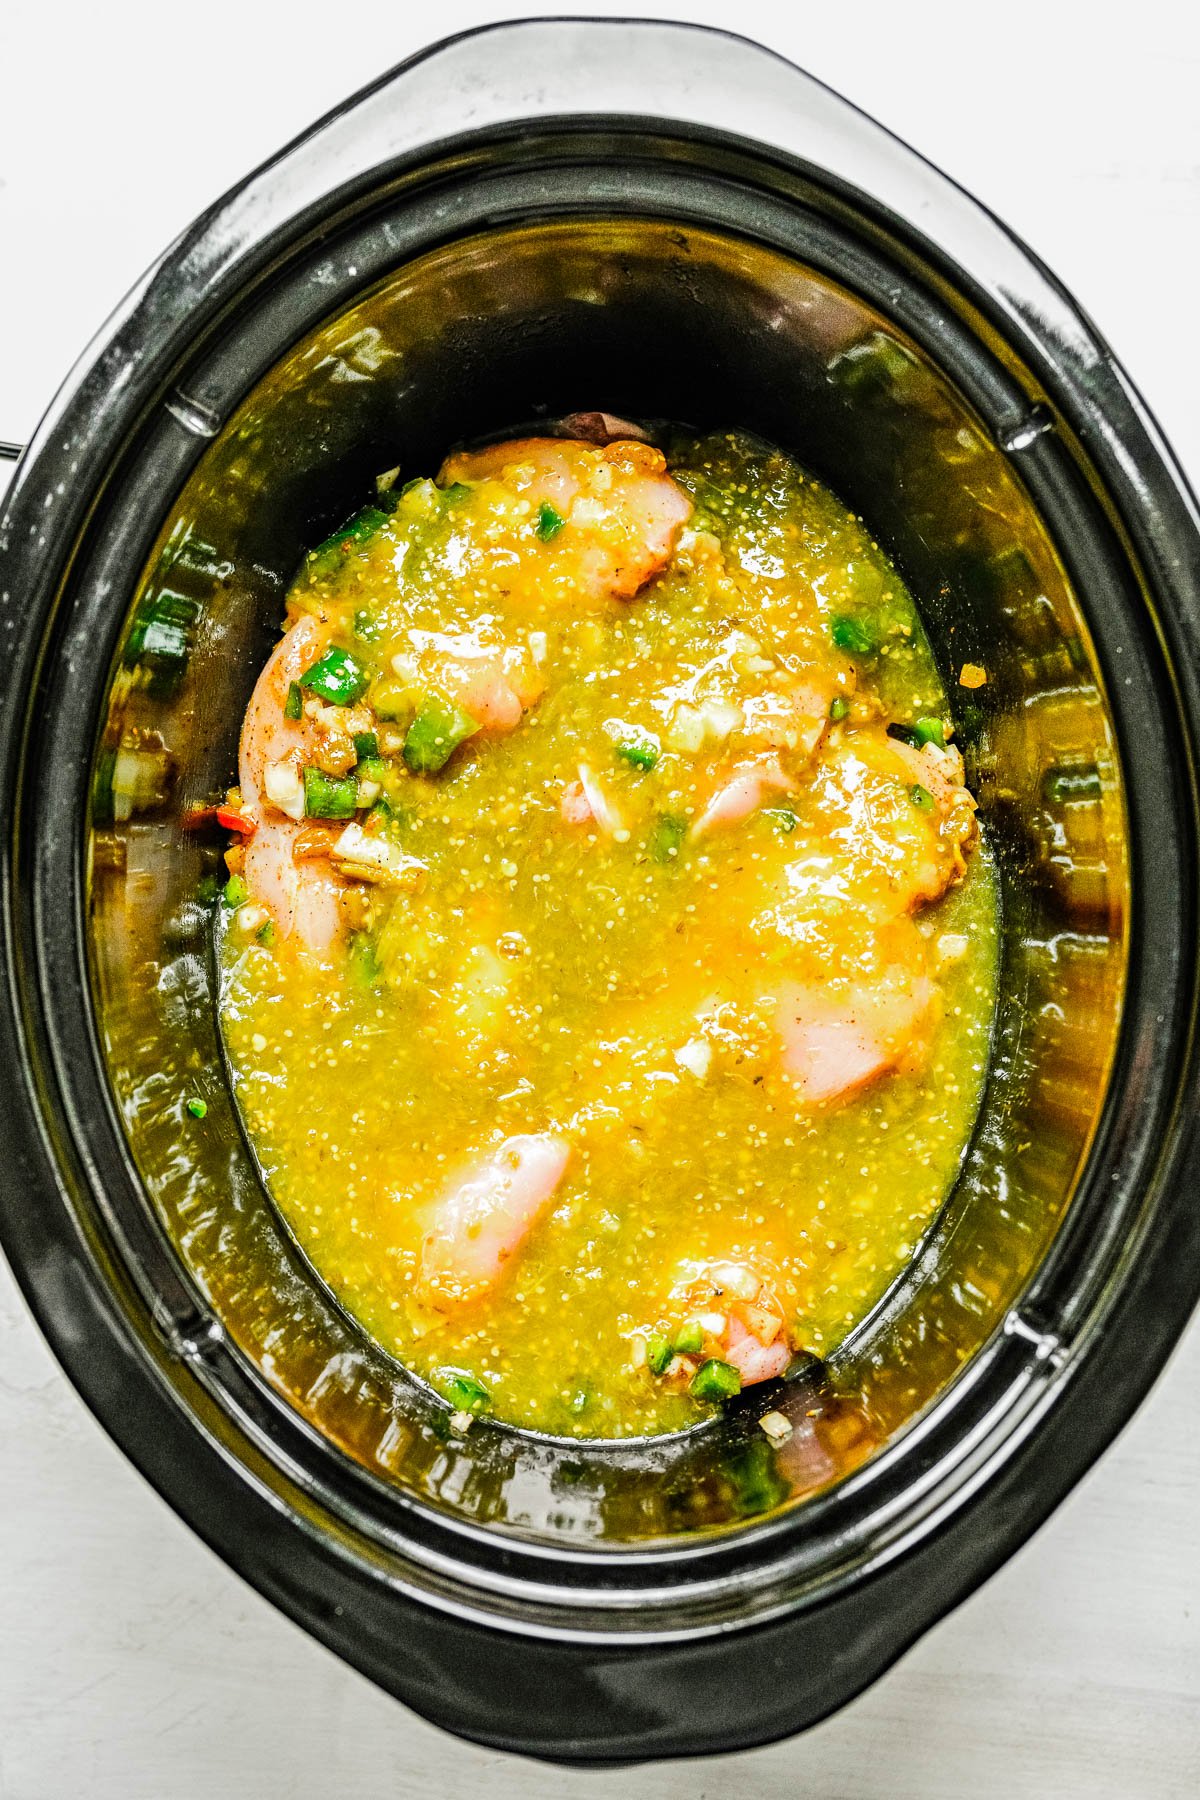 Slow Cooker Green Chile Chicken - Tender, juicy, chicken that's simmered with green chiles, jalapeno, salsa verde, onions, garlic, and spices for the most FLAVORFUL and versatile green chile chicken! Use it in tacos, burritos, casseroles, sandwiches, or as a meal prep recipe. Best of all, it's SO EASY because your slow cooker does ALL the work!